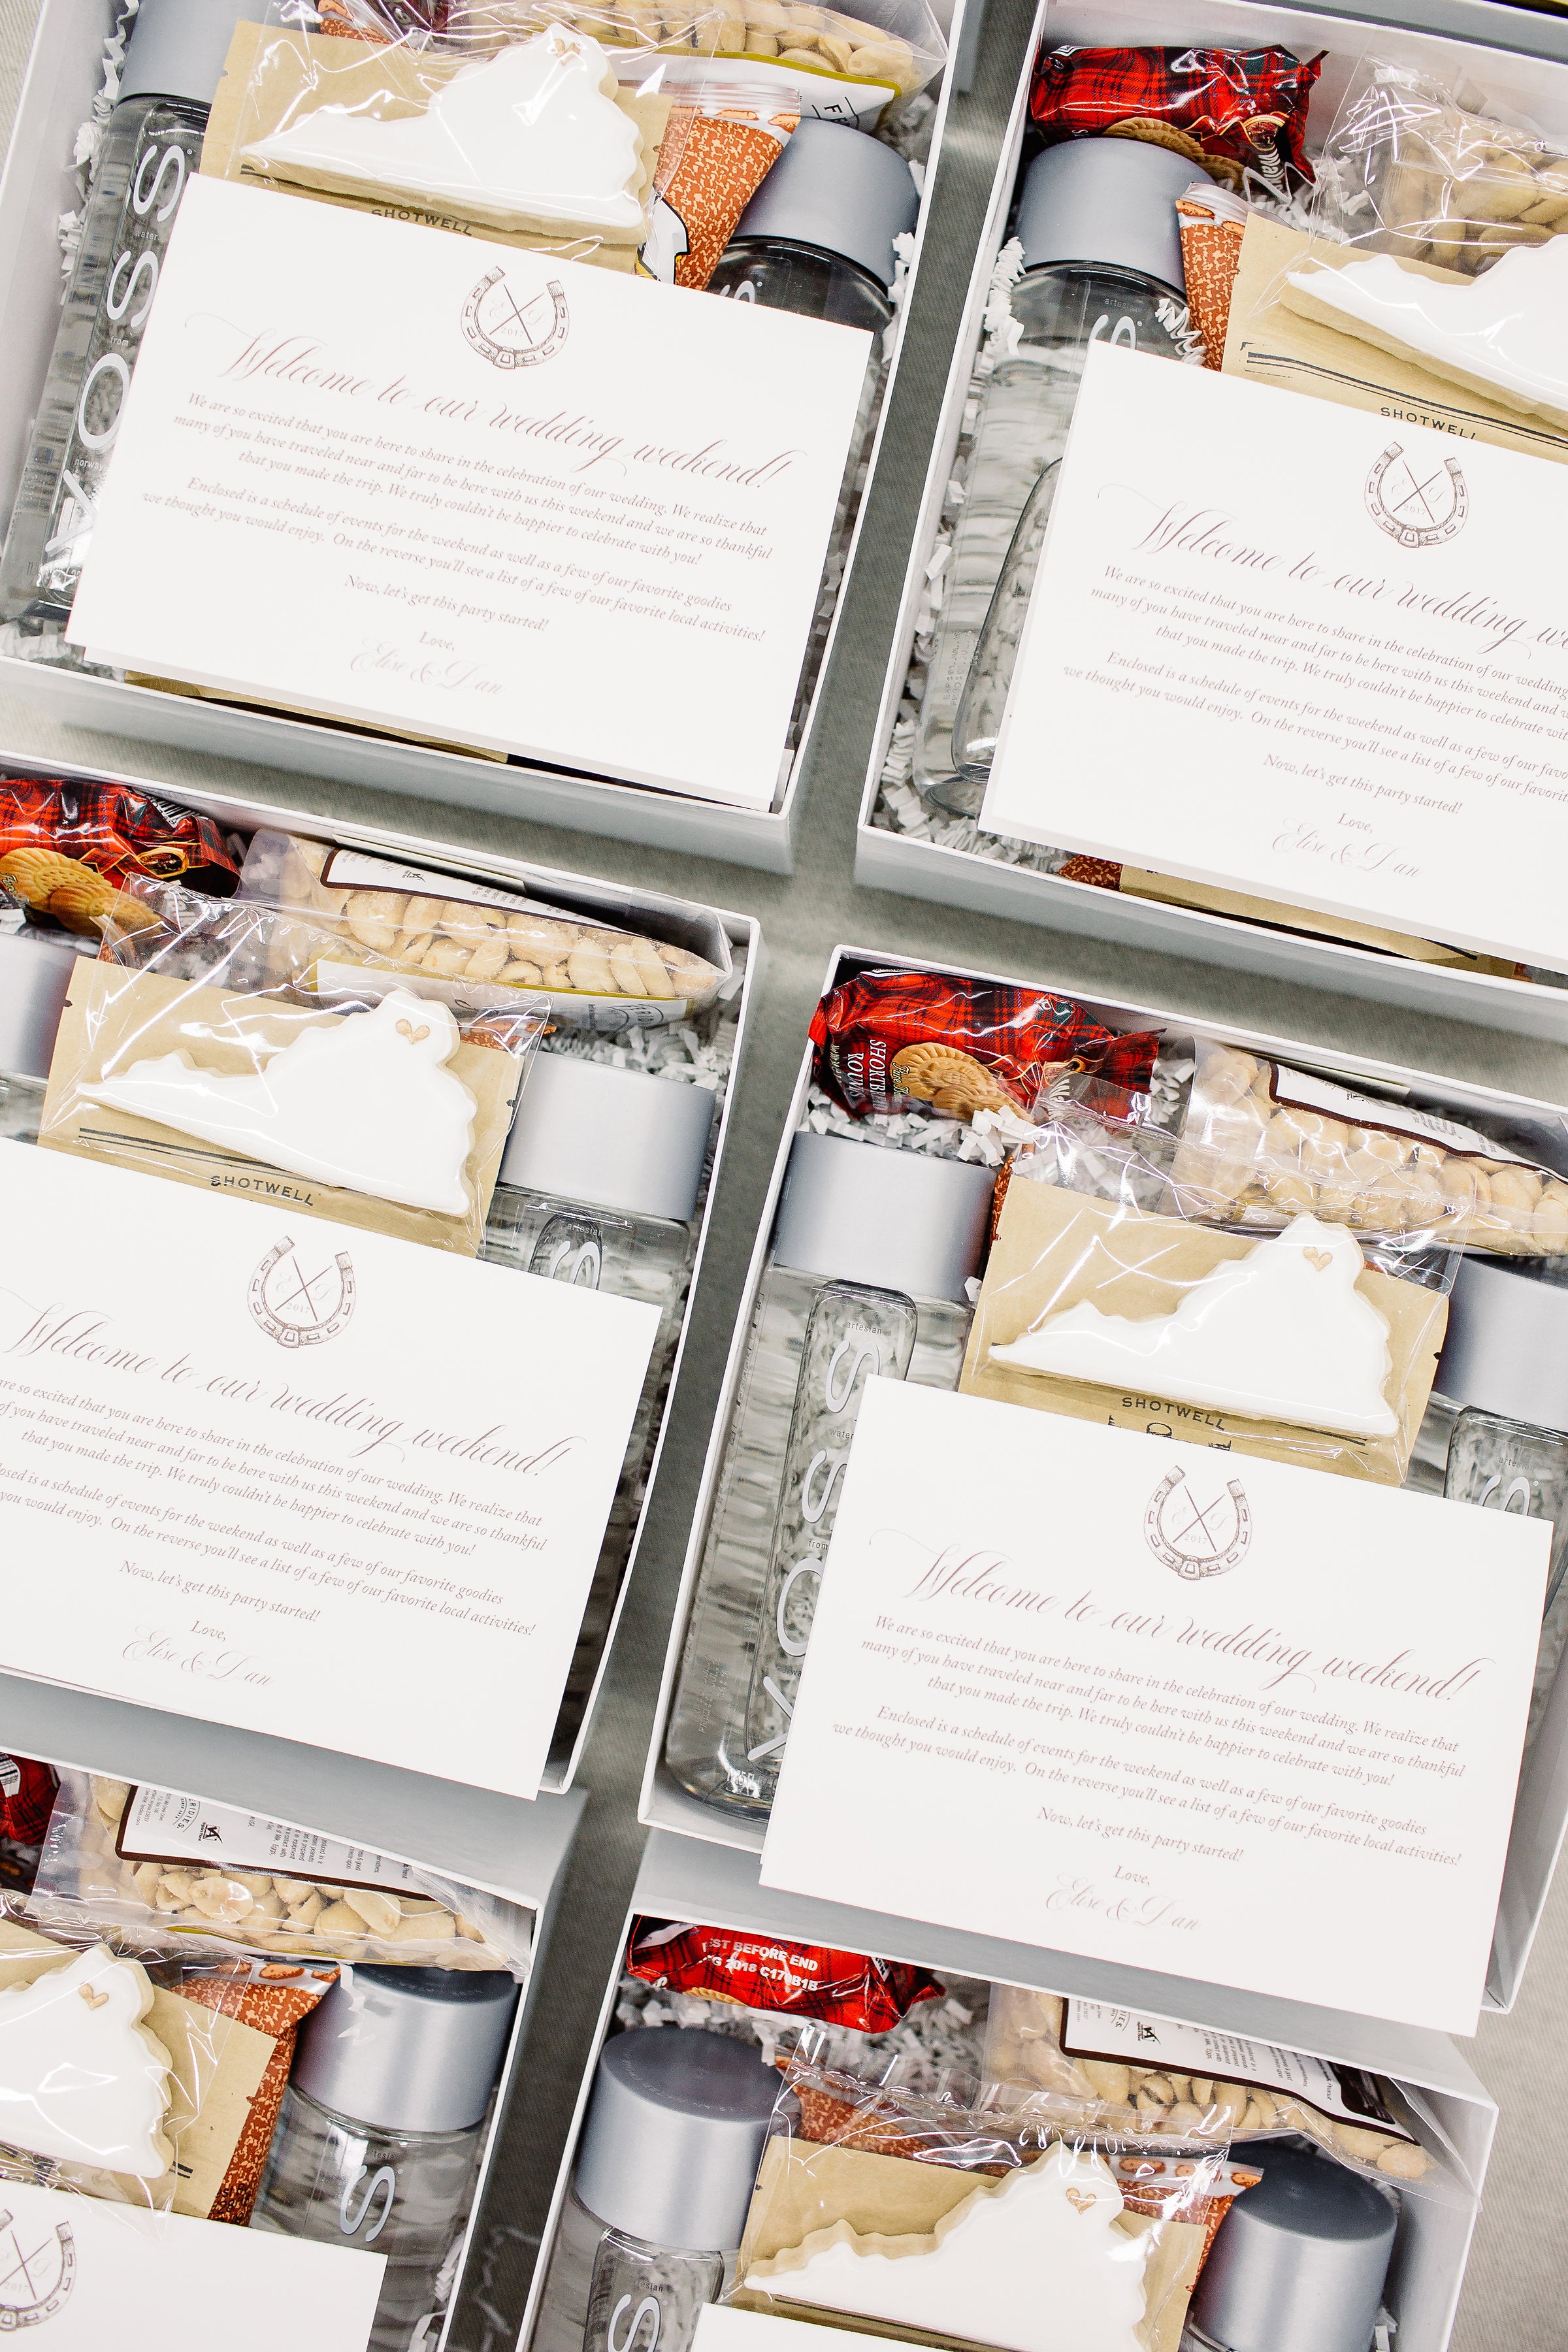 Gallery: Custom Middleburg Virginia Themed Wedding Welcome Boxes